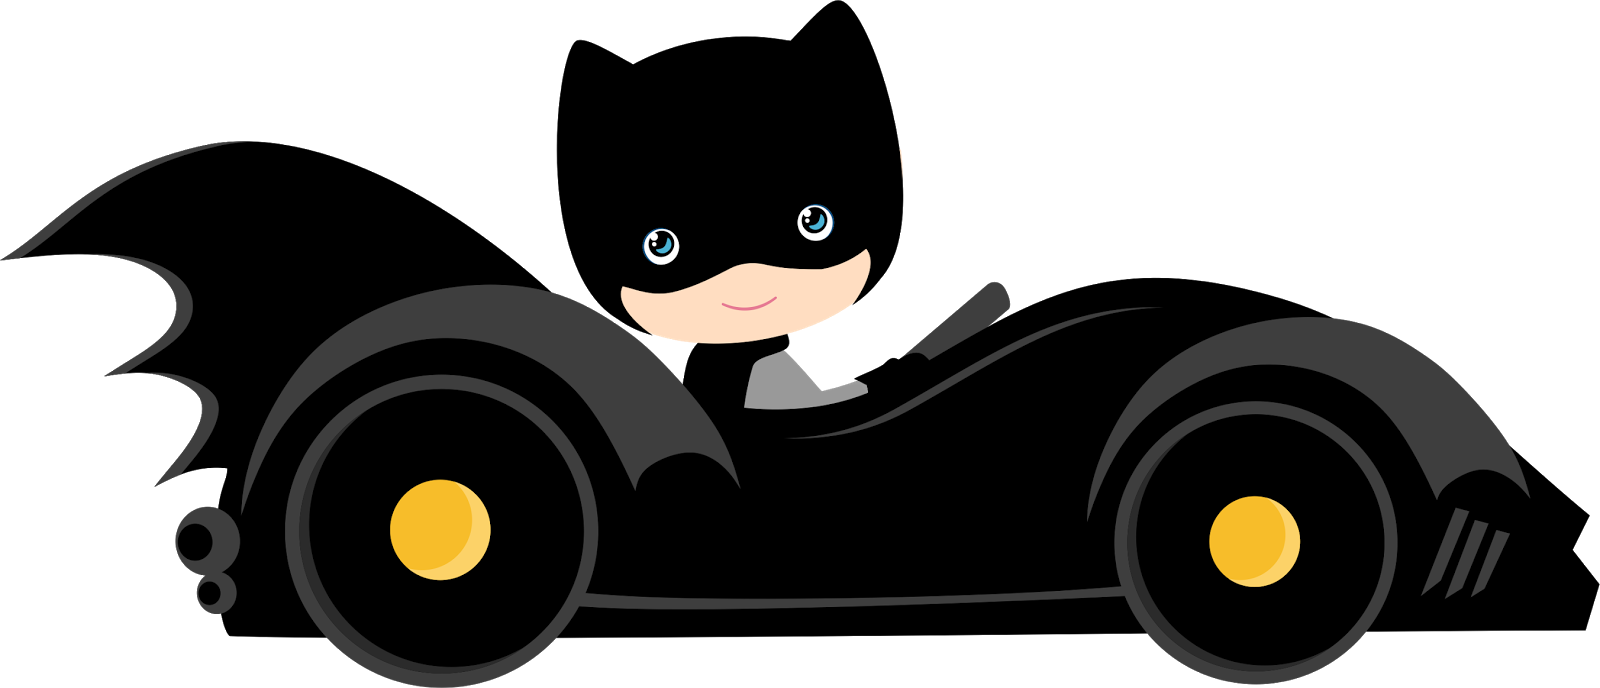 Baby Batman PNG Images Transparent Background | PNG Play